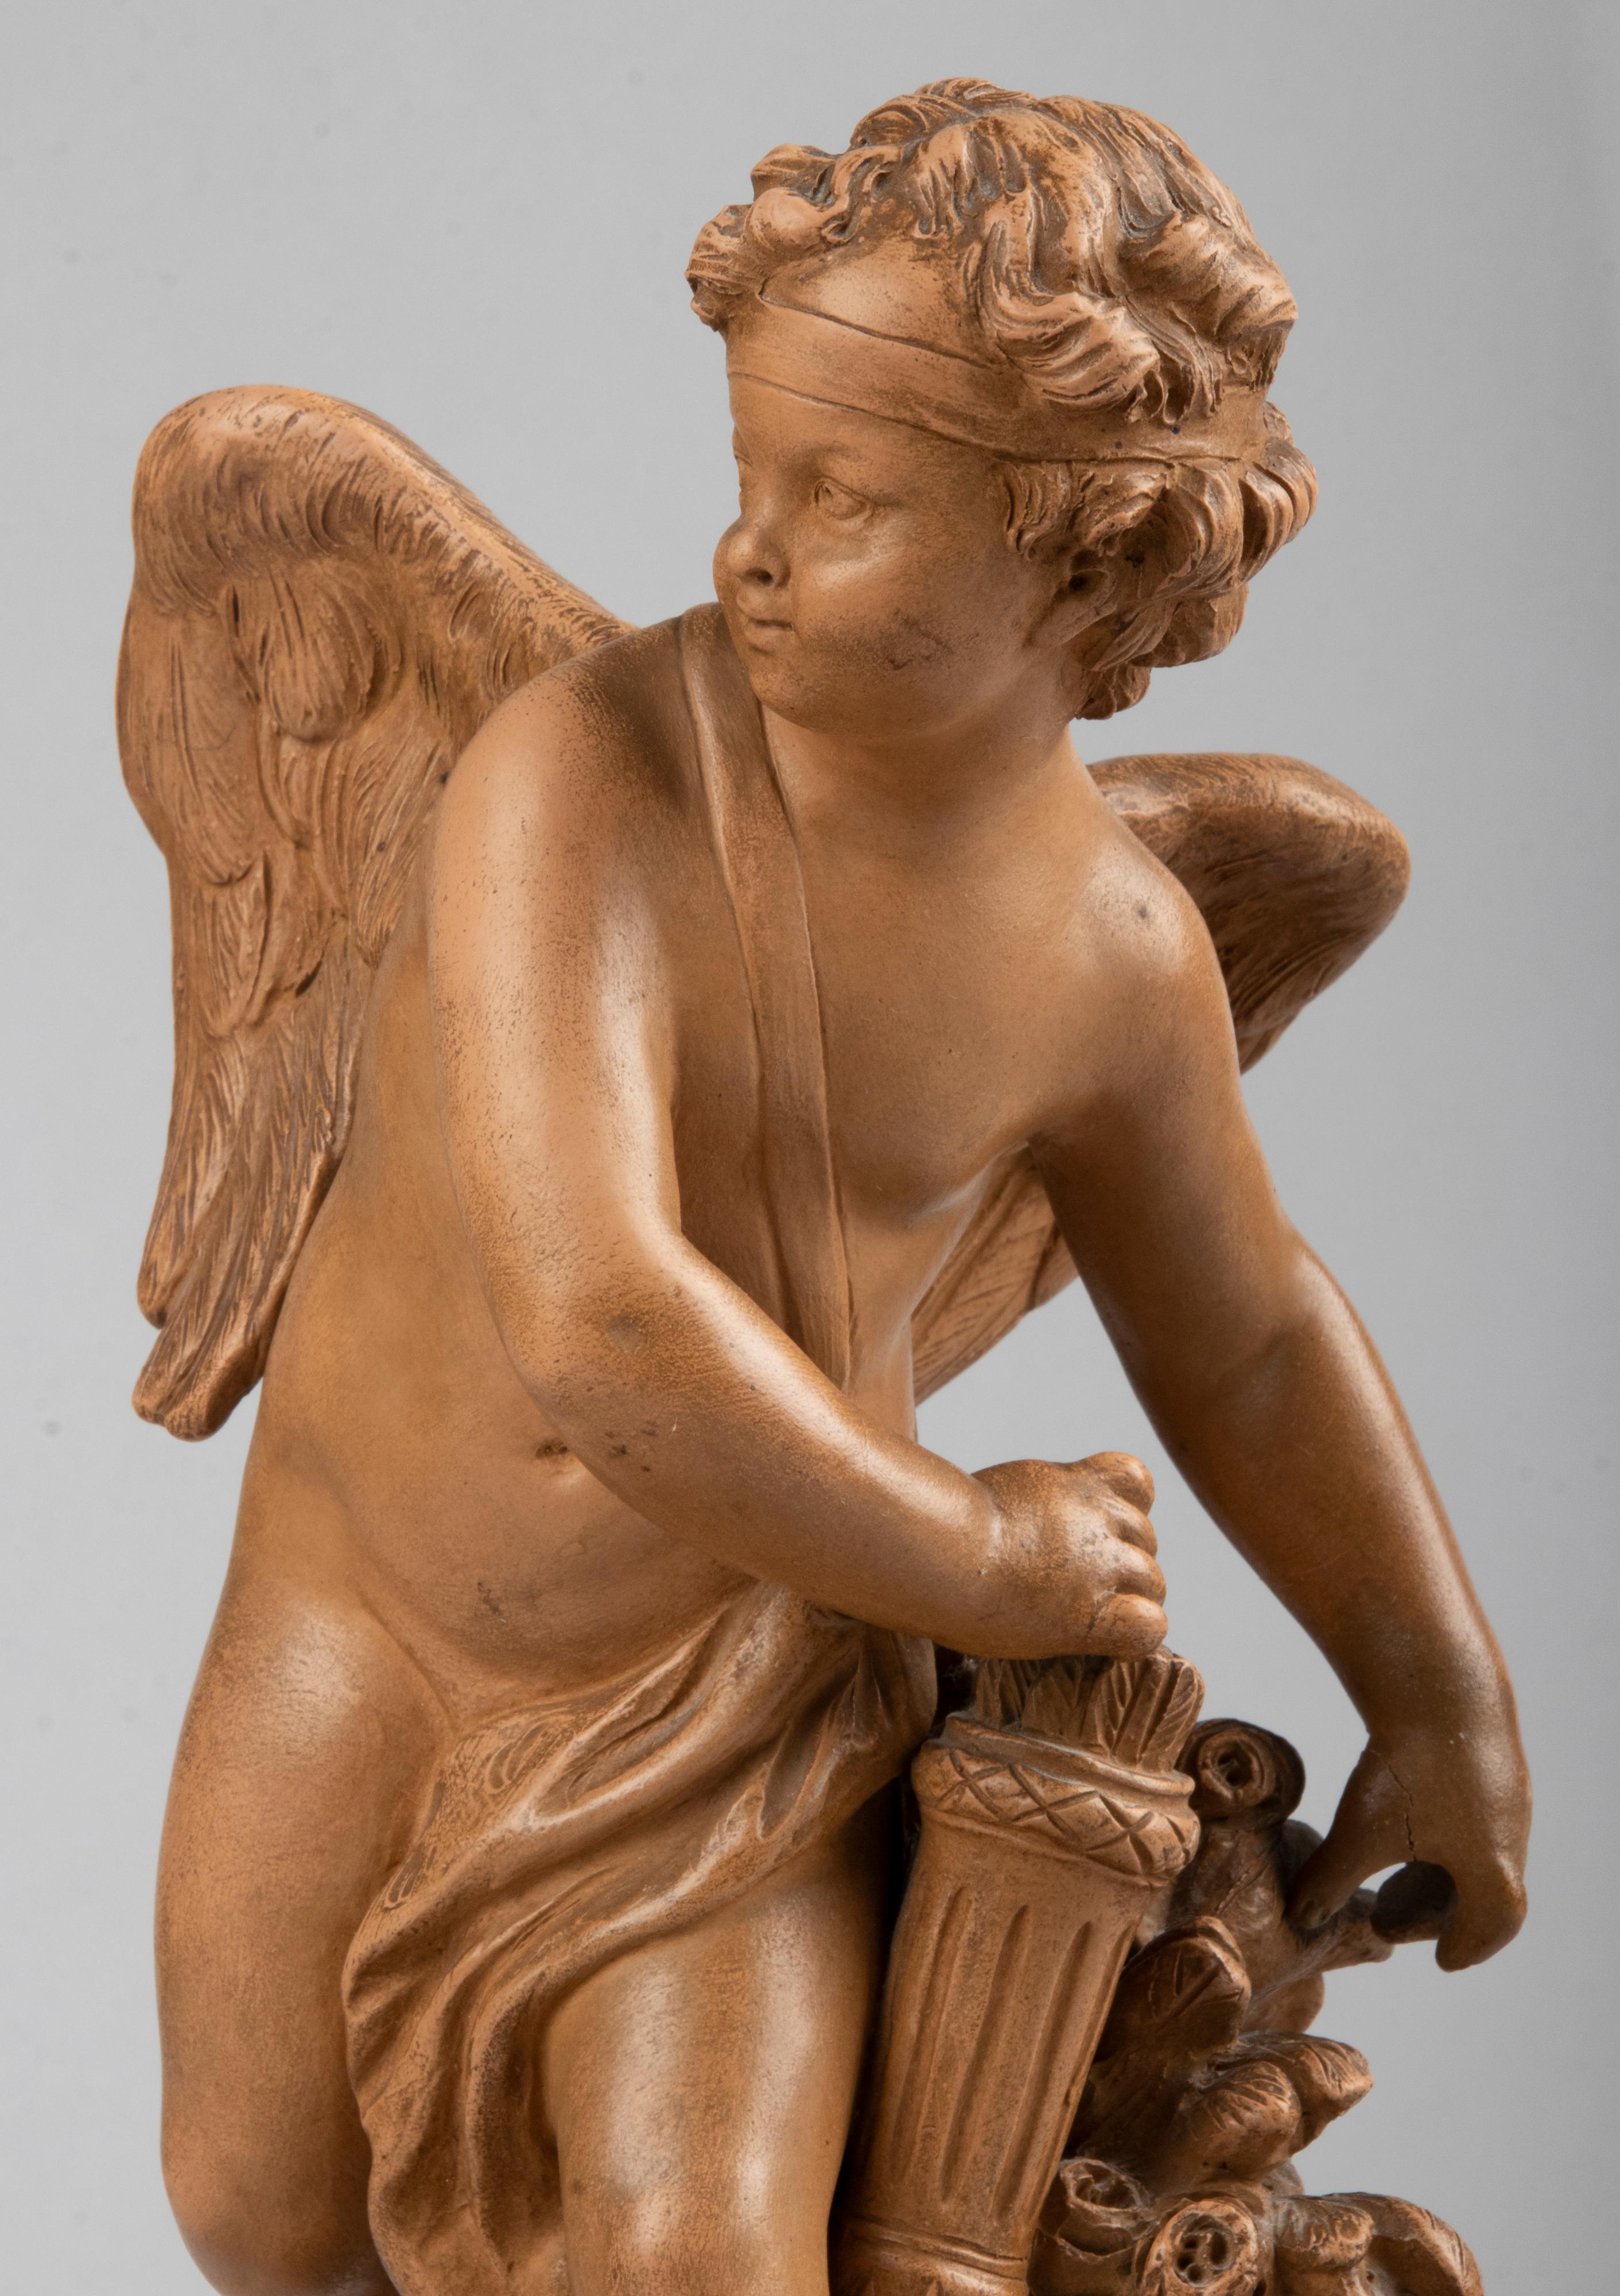 Beautiful antique terracotta sculpture, depicting Cupid taking an arrow from his quiver to shoot with his bow. The statue is inspired by a famous 18th century work by the sculptor Etienne Maurice Falconet (1716-1791). The statue is made of